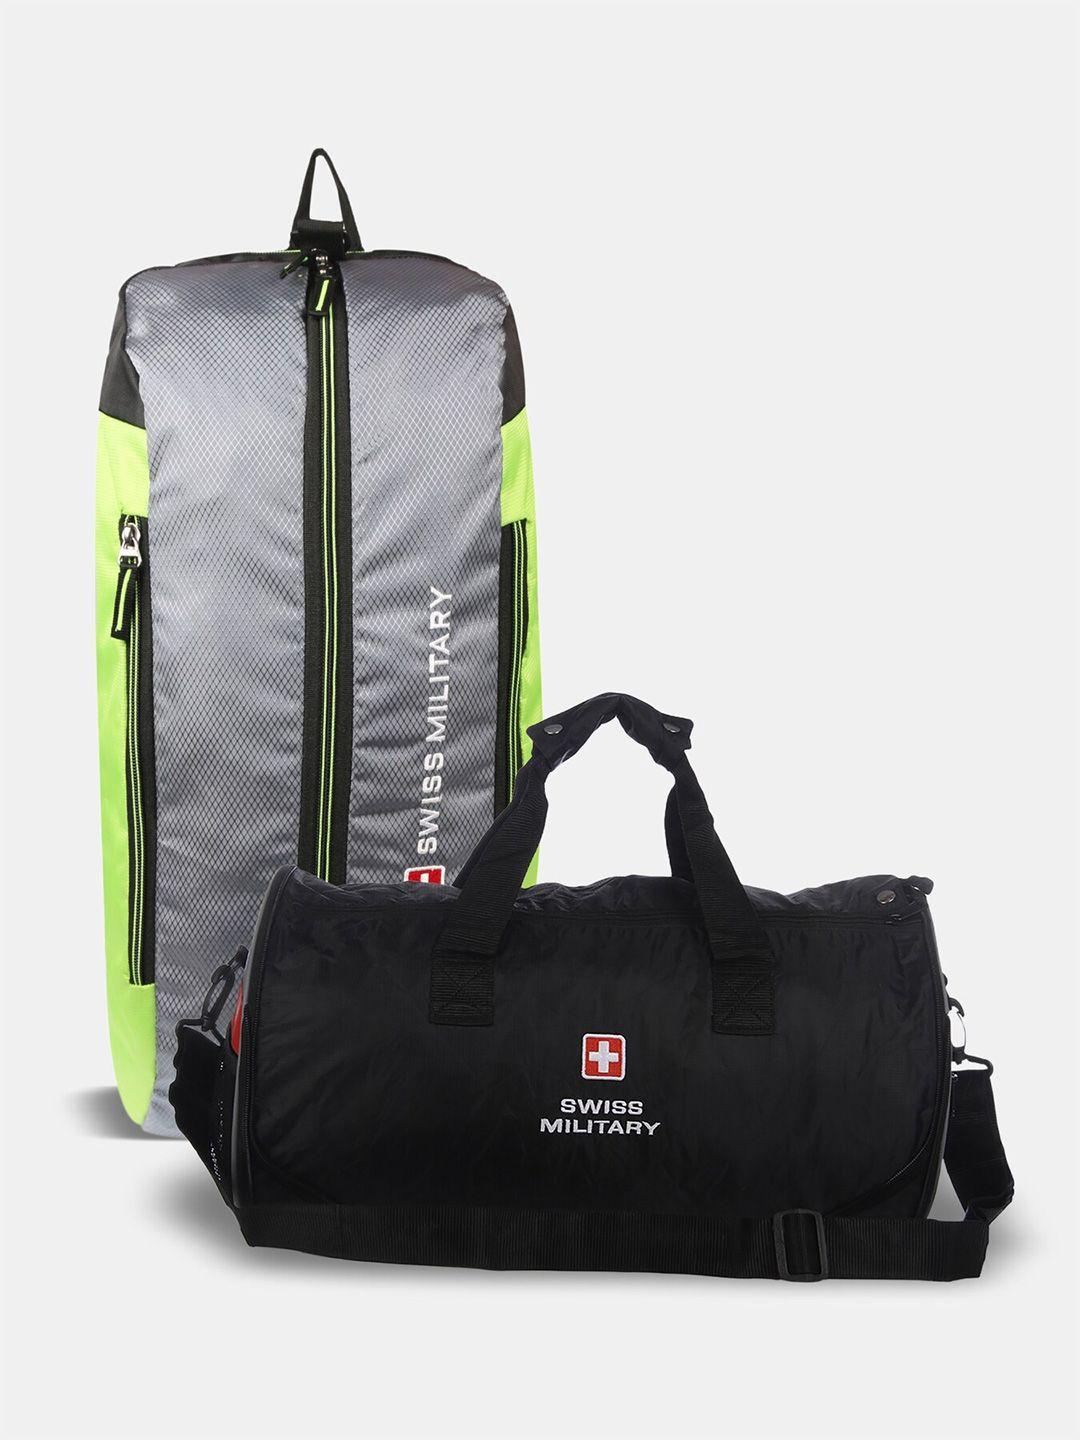 swiss military colourblocked water resistant backpack & foldable sports bag